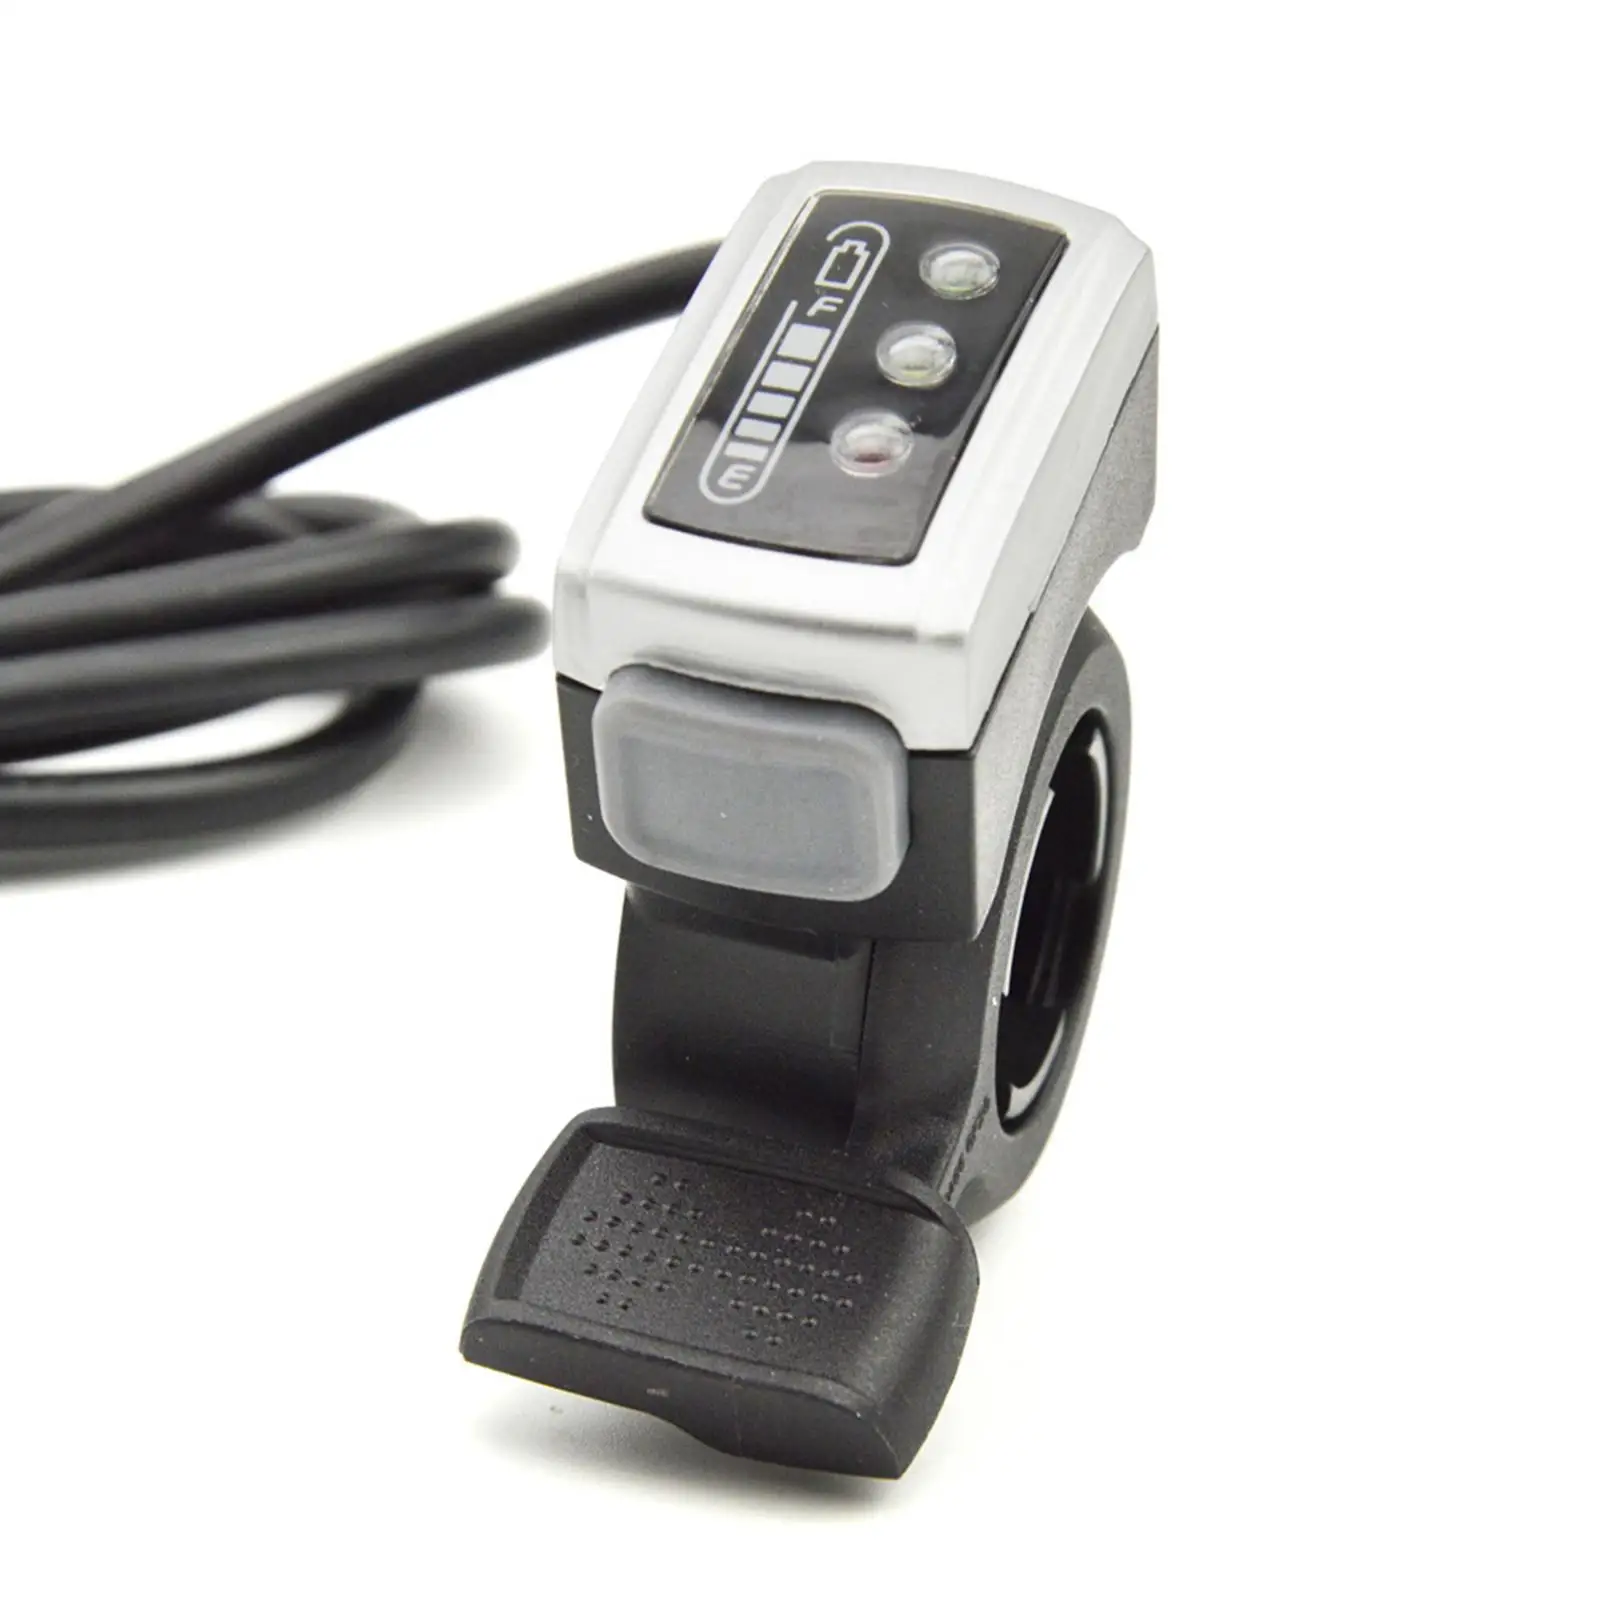 48V Thumb Throttle  Control Power Display Controller Conversion Accessories with Cable  for Electric Scooters 22mm Handle